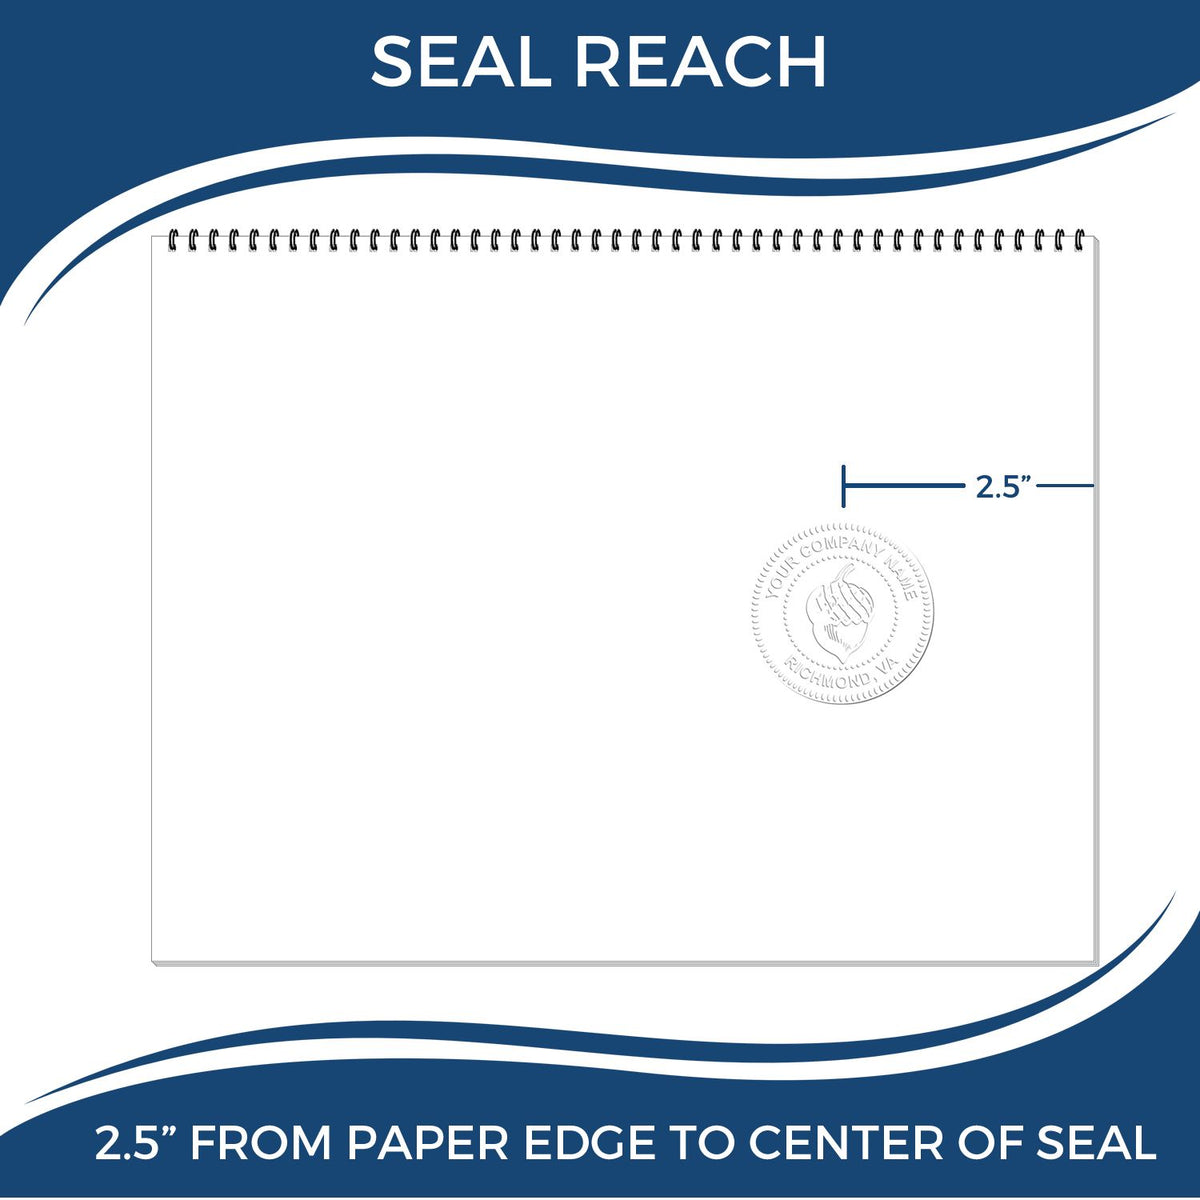 An infographic showing the seal reach which is represented by a ruler and a miniature seal image of the Long Reach Oregon Geology Seal